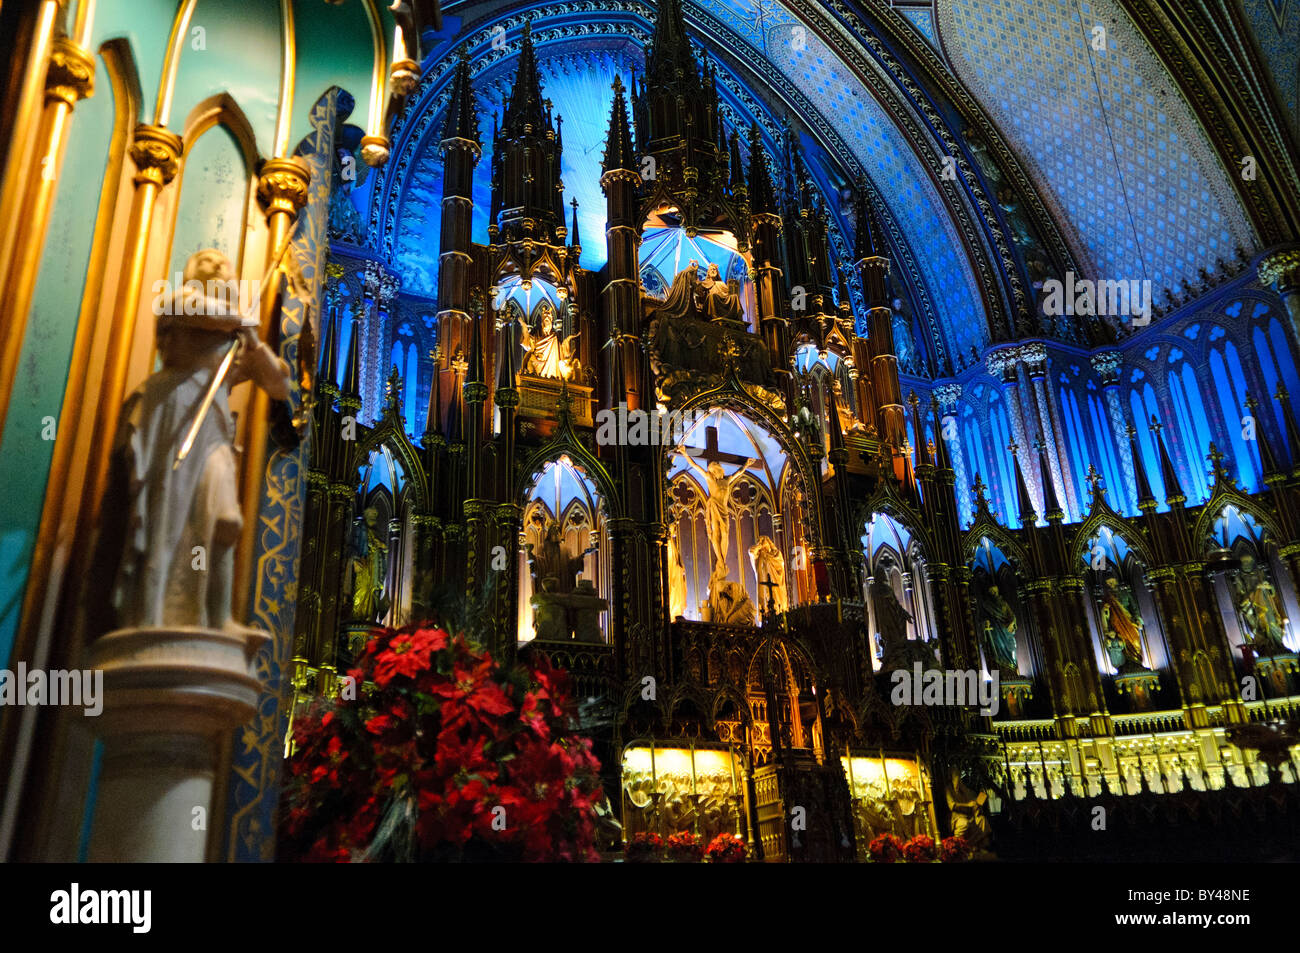 MONTREAL, Canada - Interior and main altar of the Notre-Dame Basilica in  the heart of Old Montreal. With the exterior modeled loosely on the famous Notre  Dame de Paris, when the second